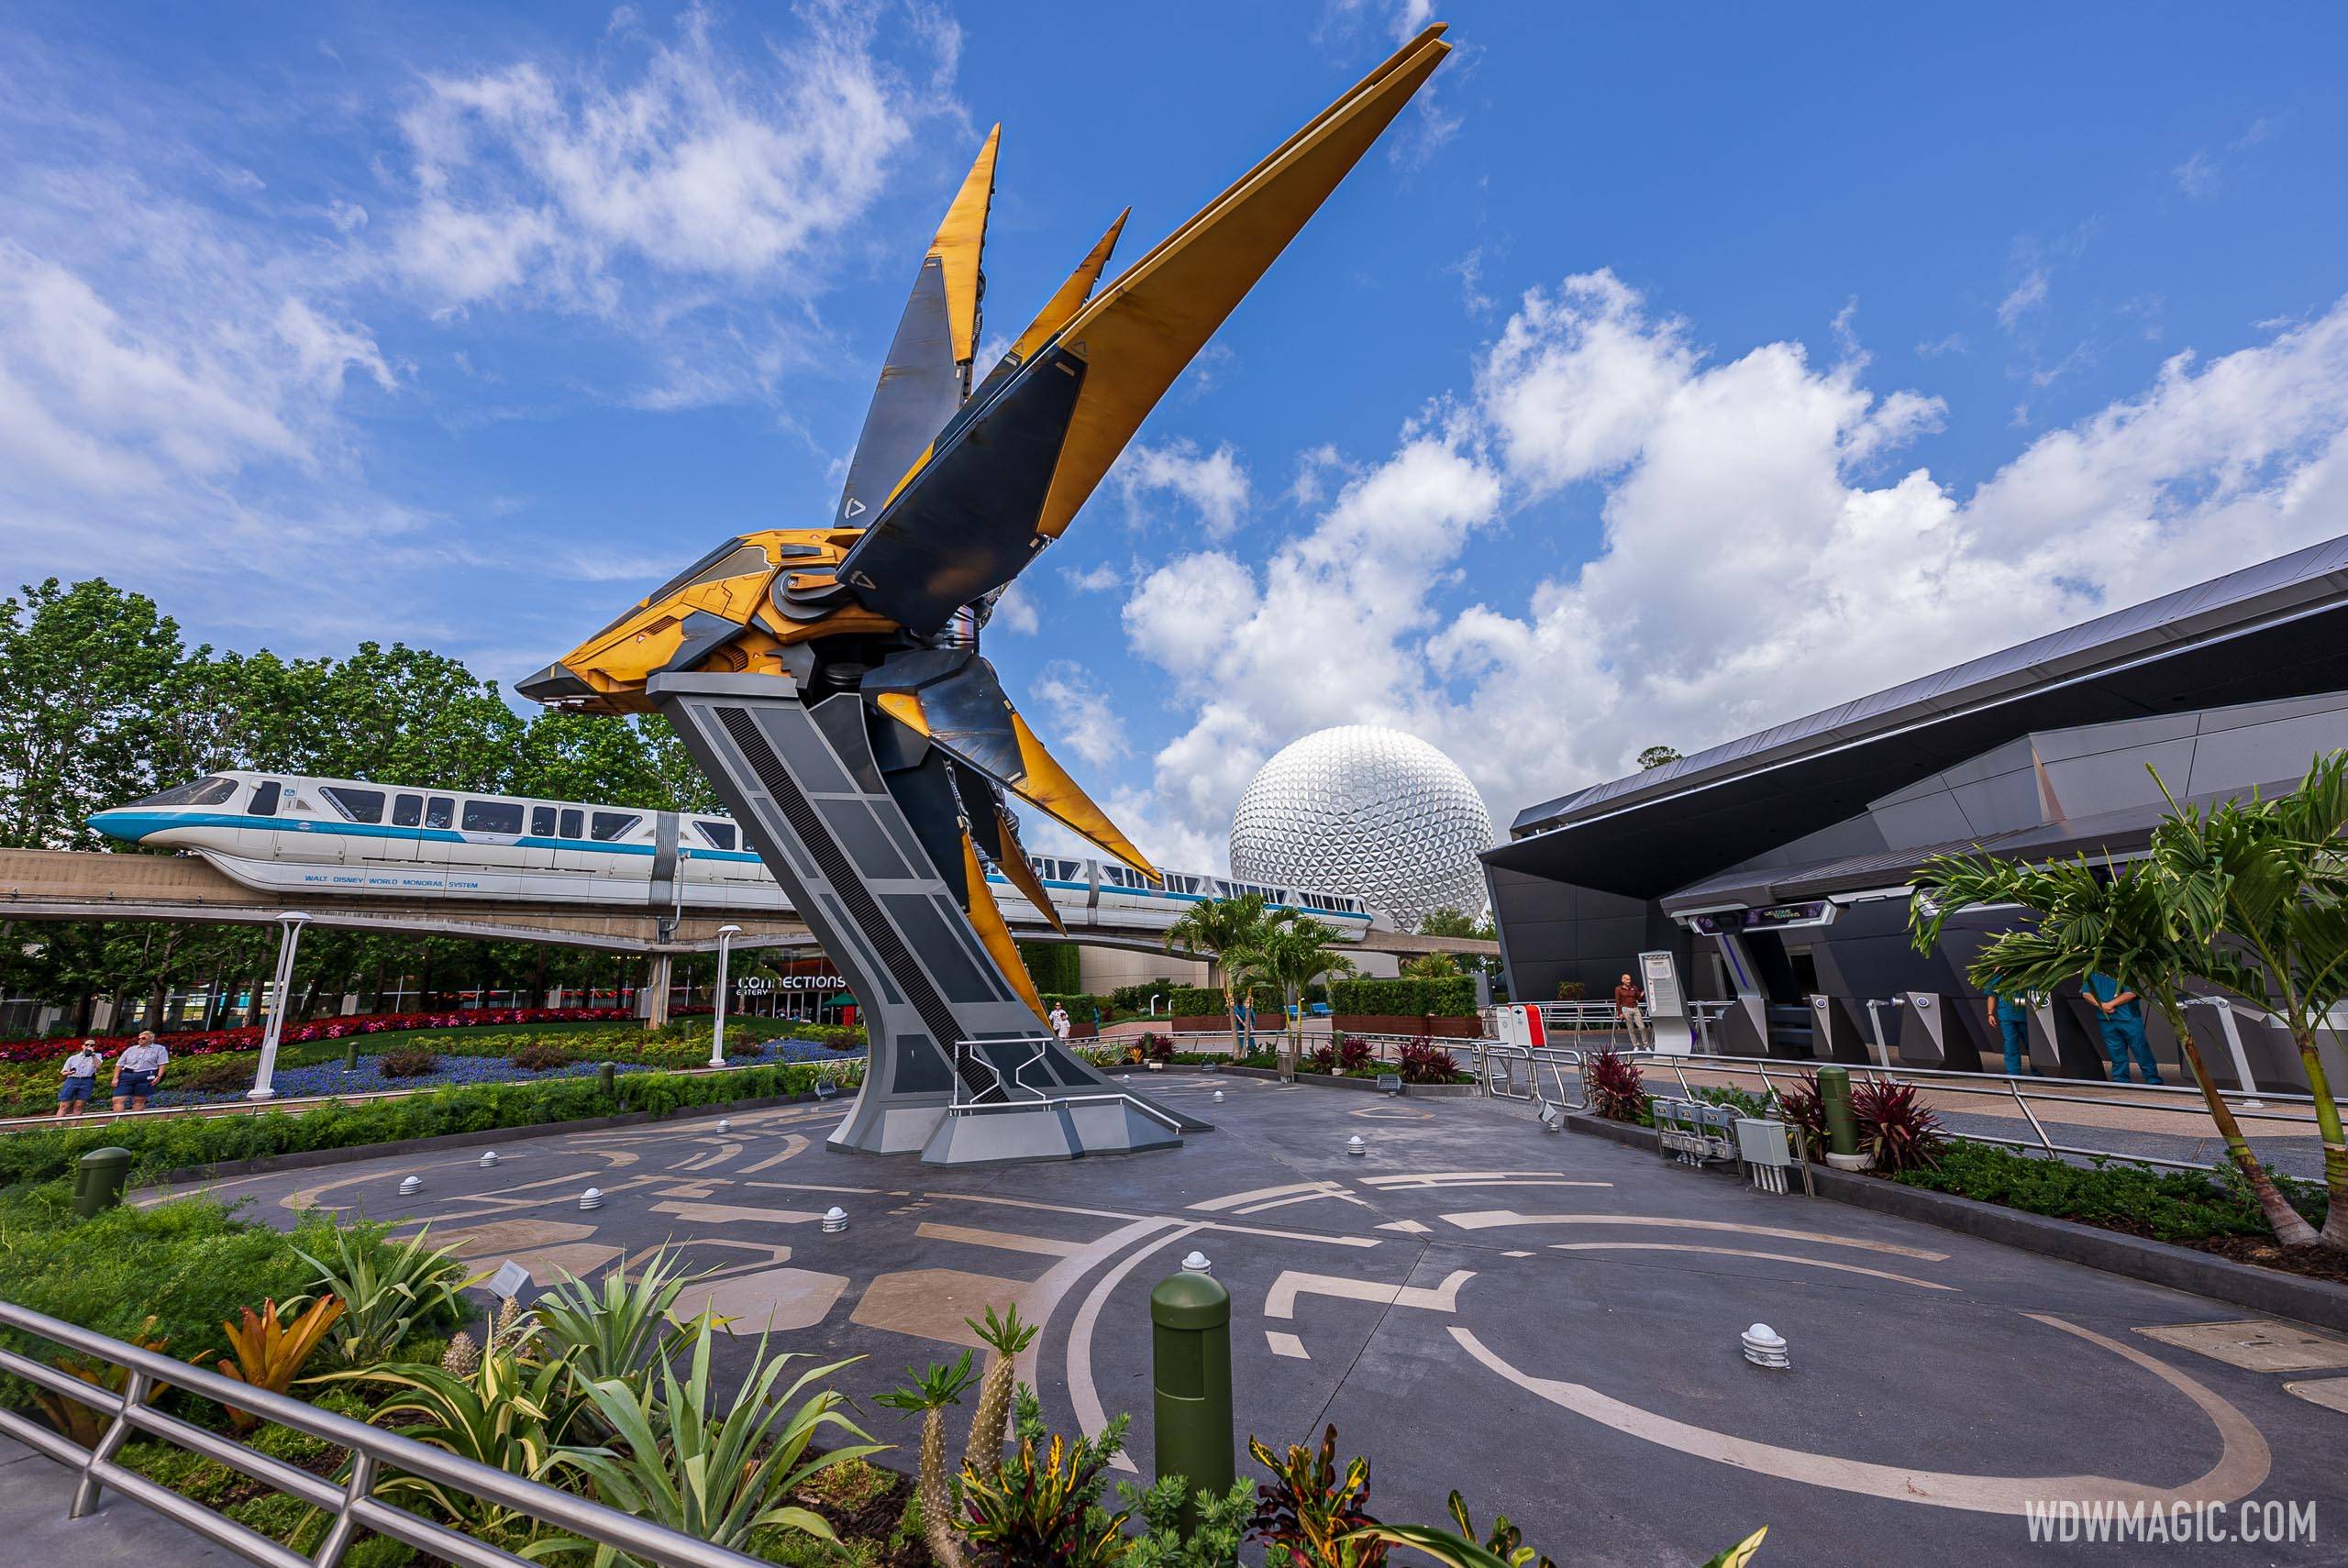 Nova Corps Starblaster with Spaceship Earth and Monorail passing by Guardians of the Galaxy Cosmic Rewind